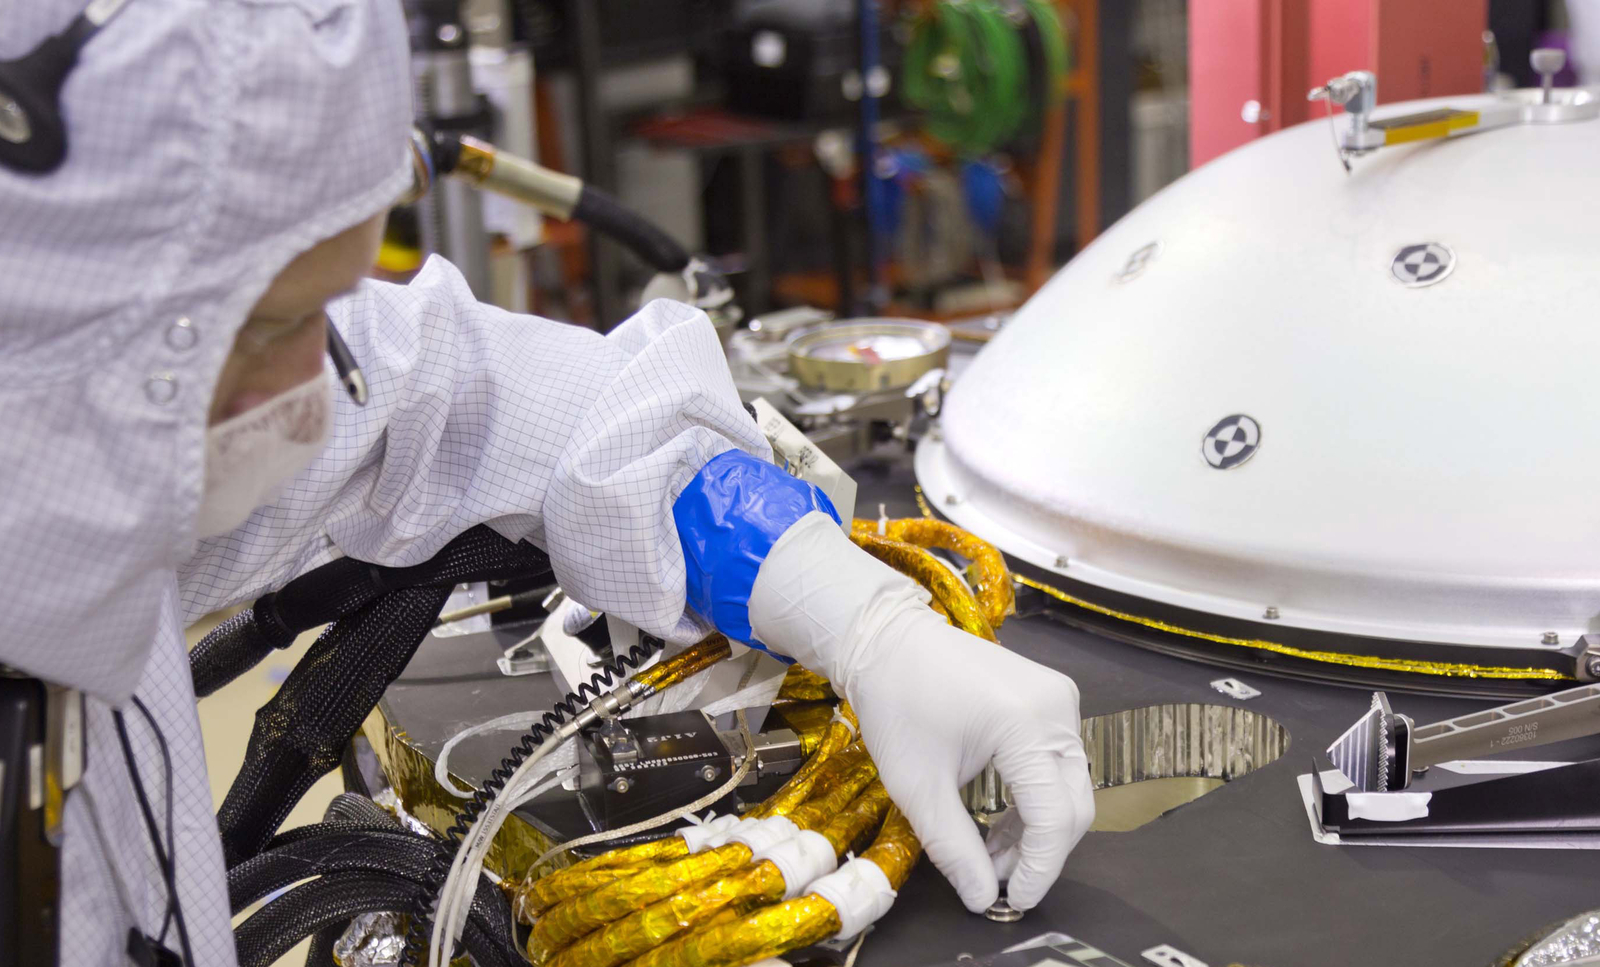 A spacecraft specialist in a clean room at Lockheed Martin Space Systems in Denver, where the InSight lander is being built, affixes a dime-size chip onto the lander deck in November 2015.